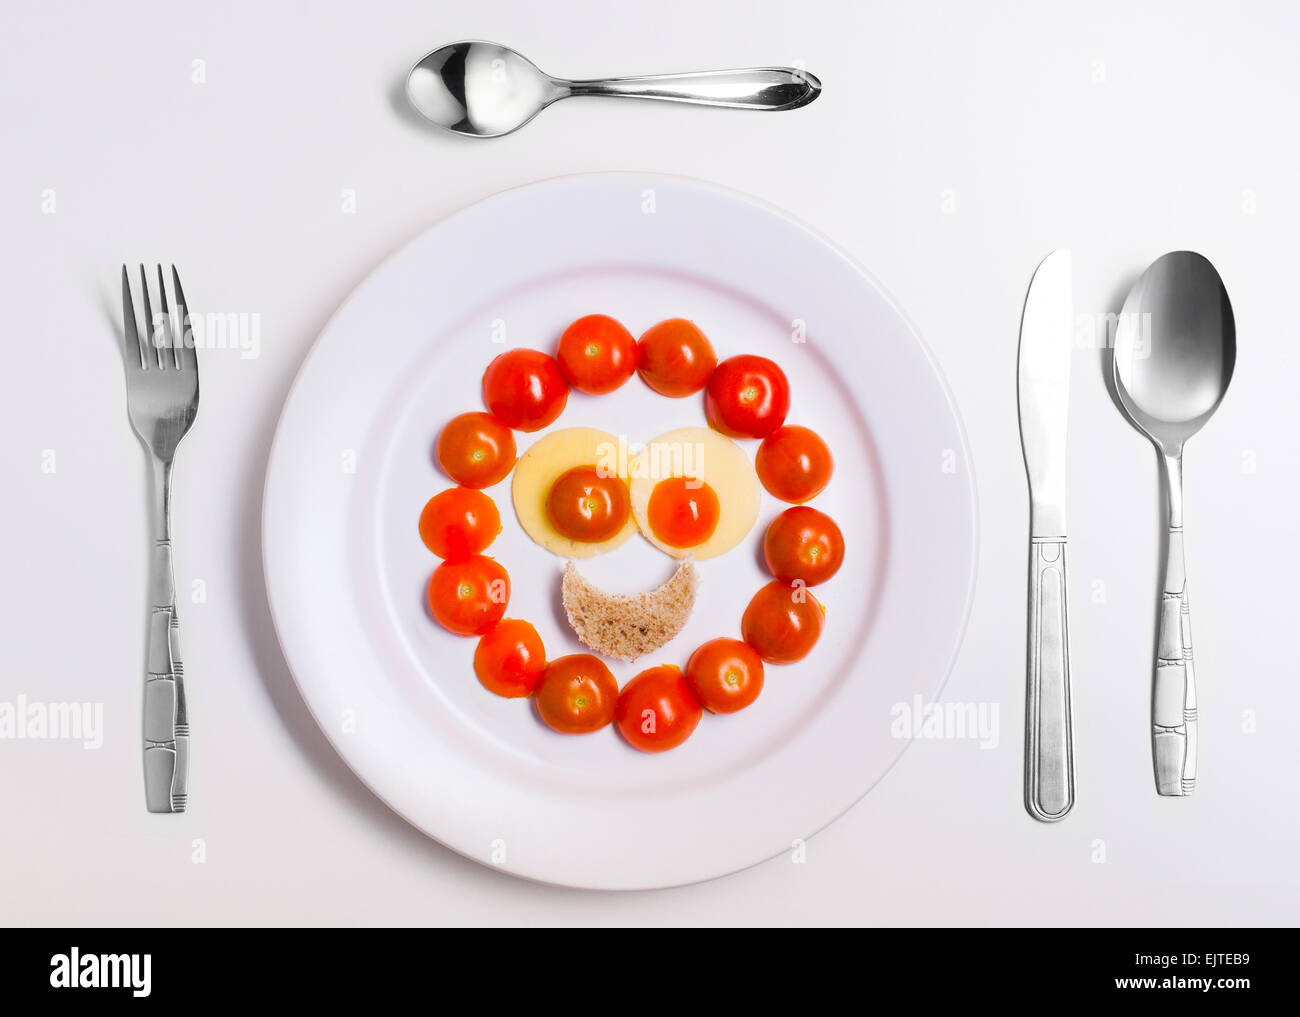 fun emoticon food, made from cheese and tomatoes, on a plate with cutlery, isolated Stock Photo